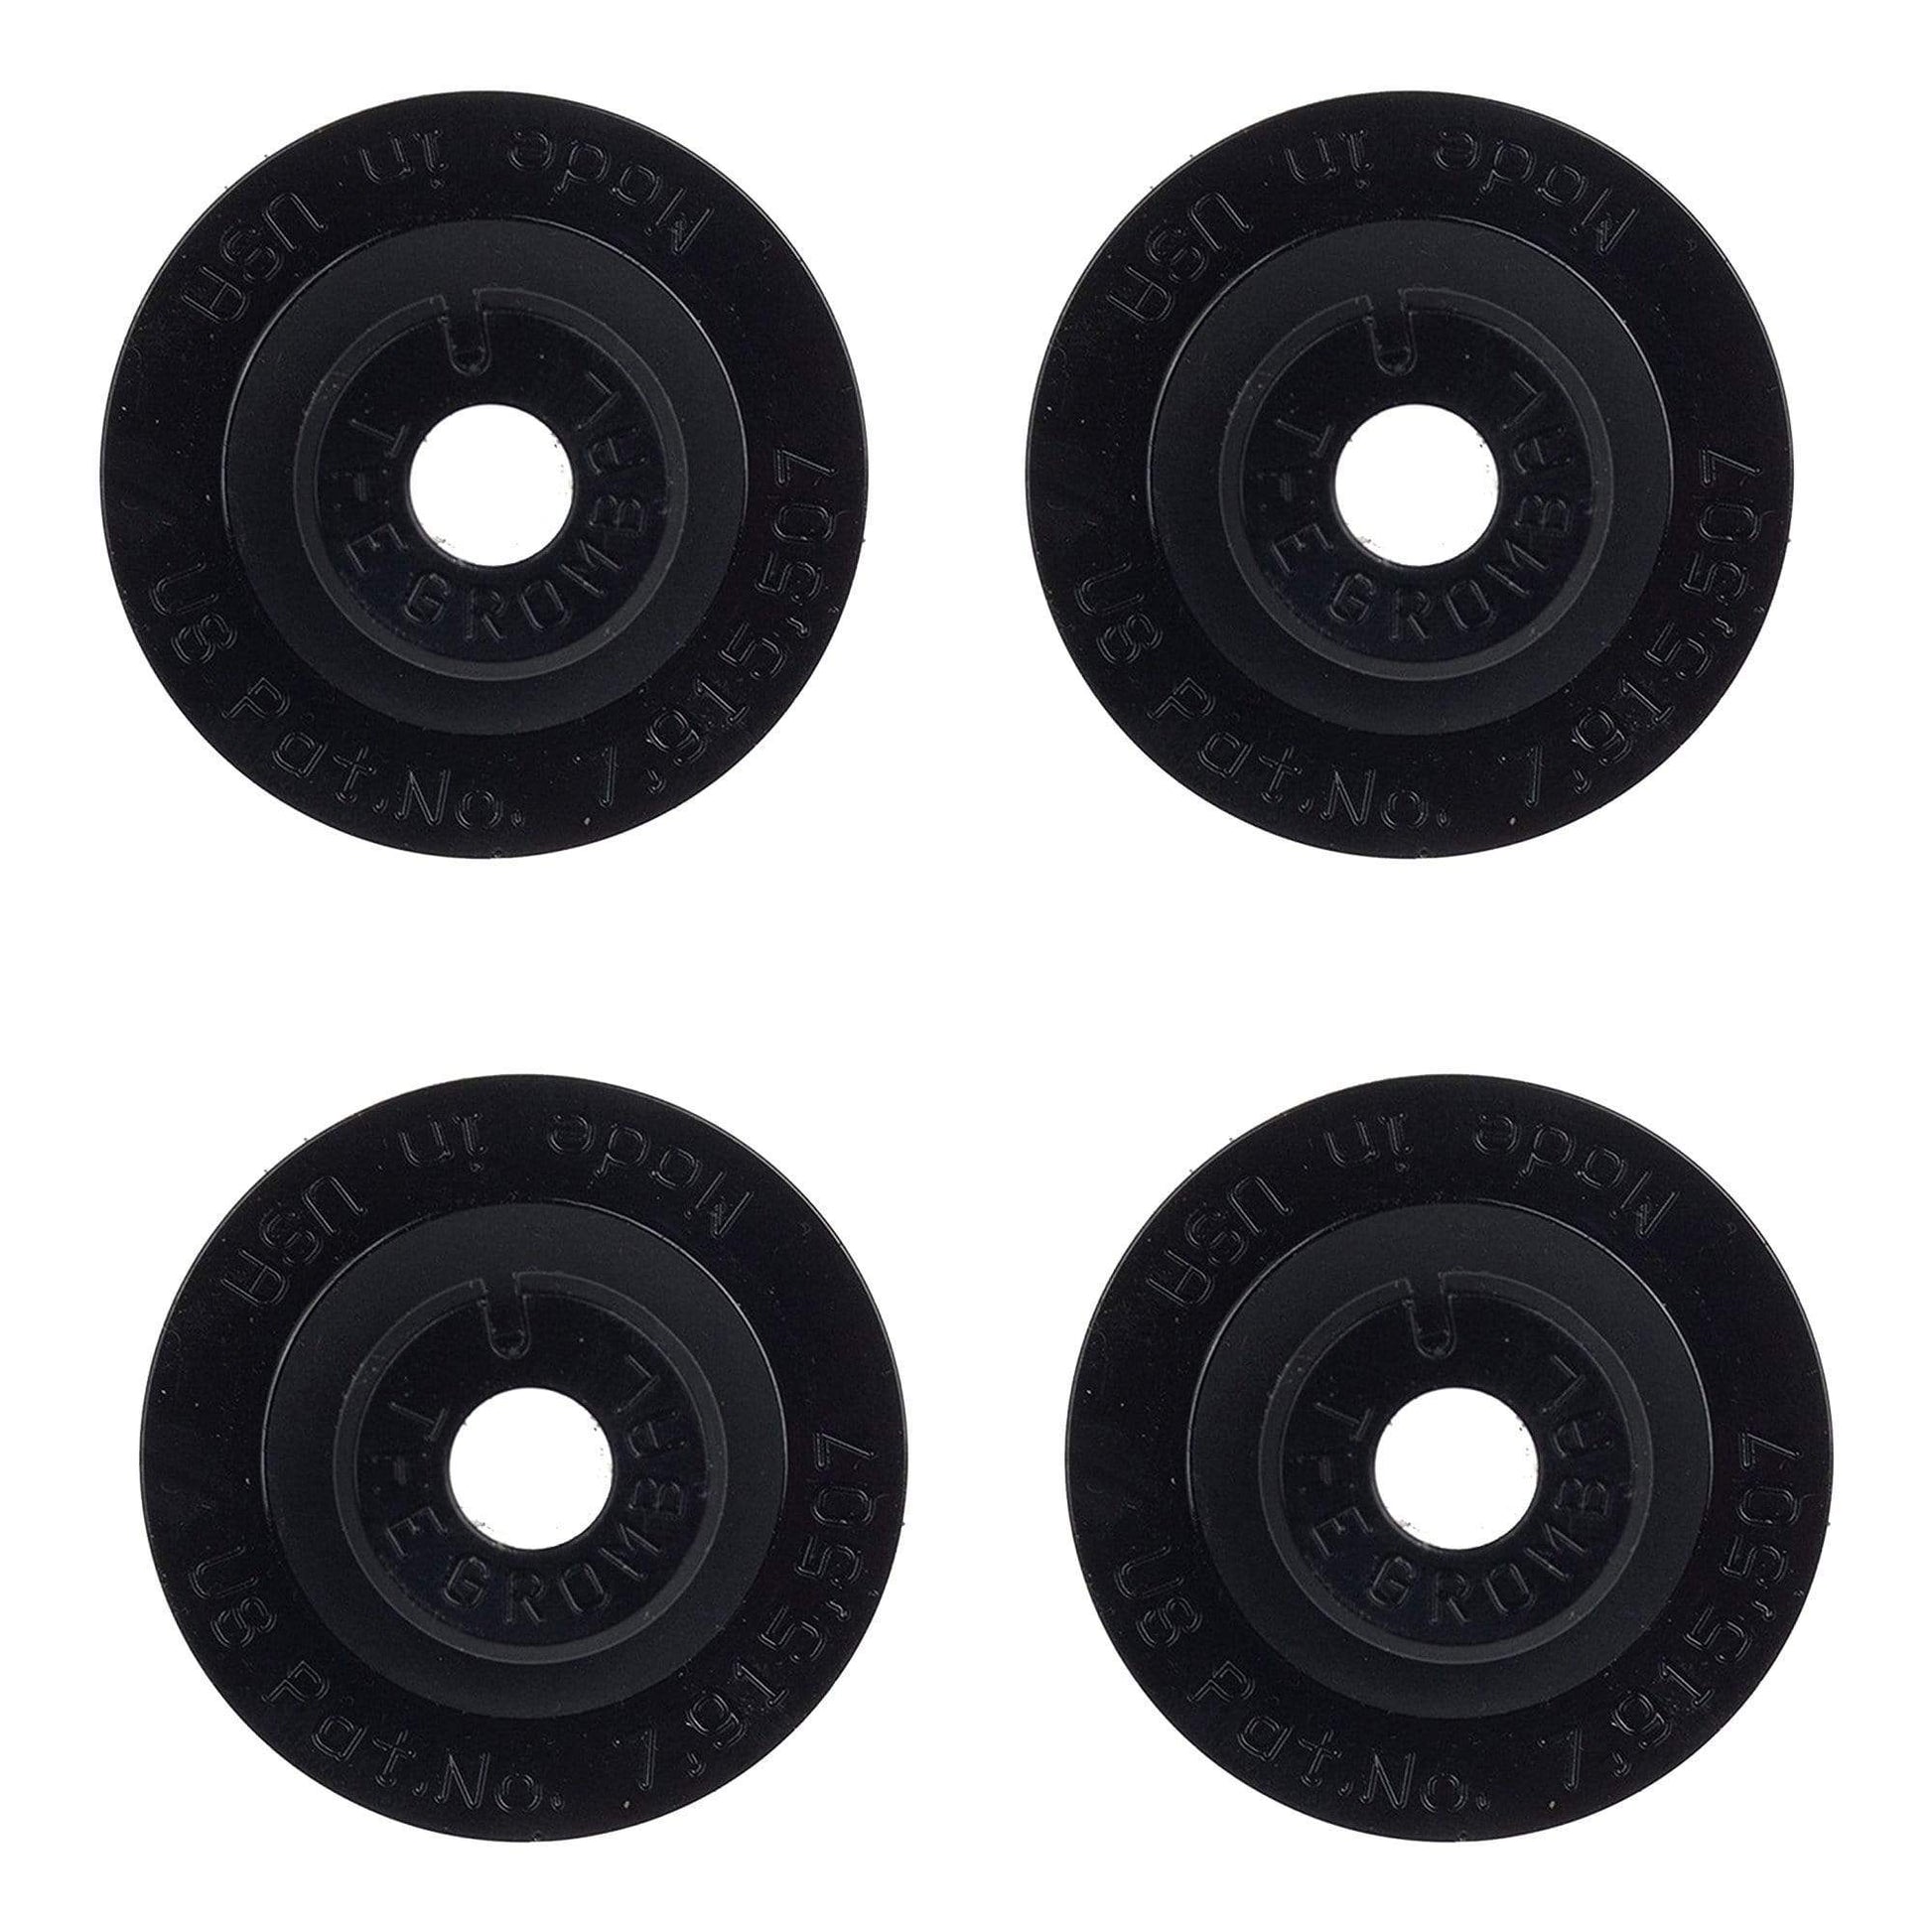 Grombal Cymbal Grommet (4 Pack Bundle) Drums and Percussion / Parts and Accessories / Drum Parts